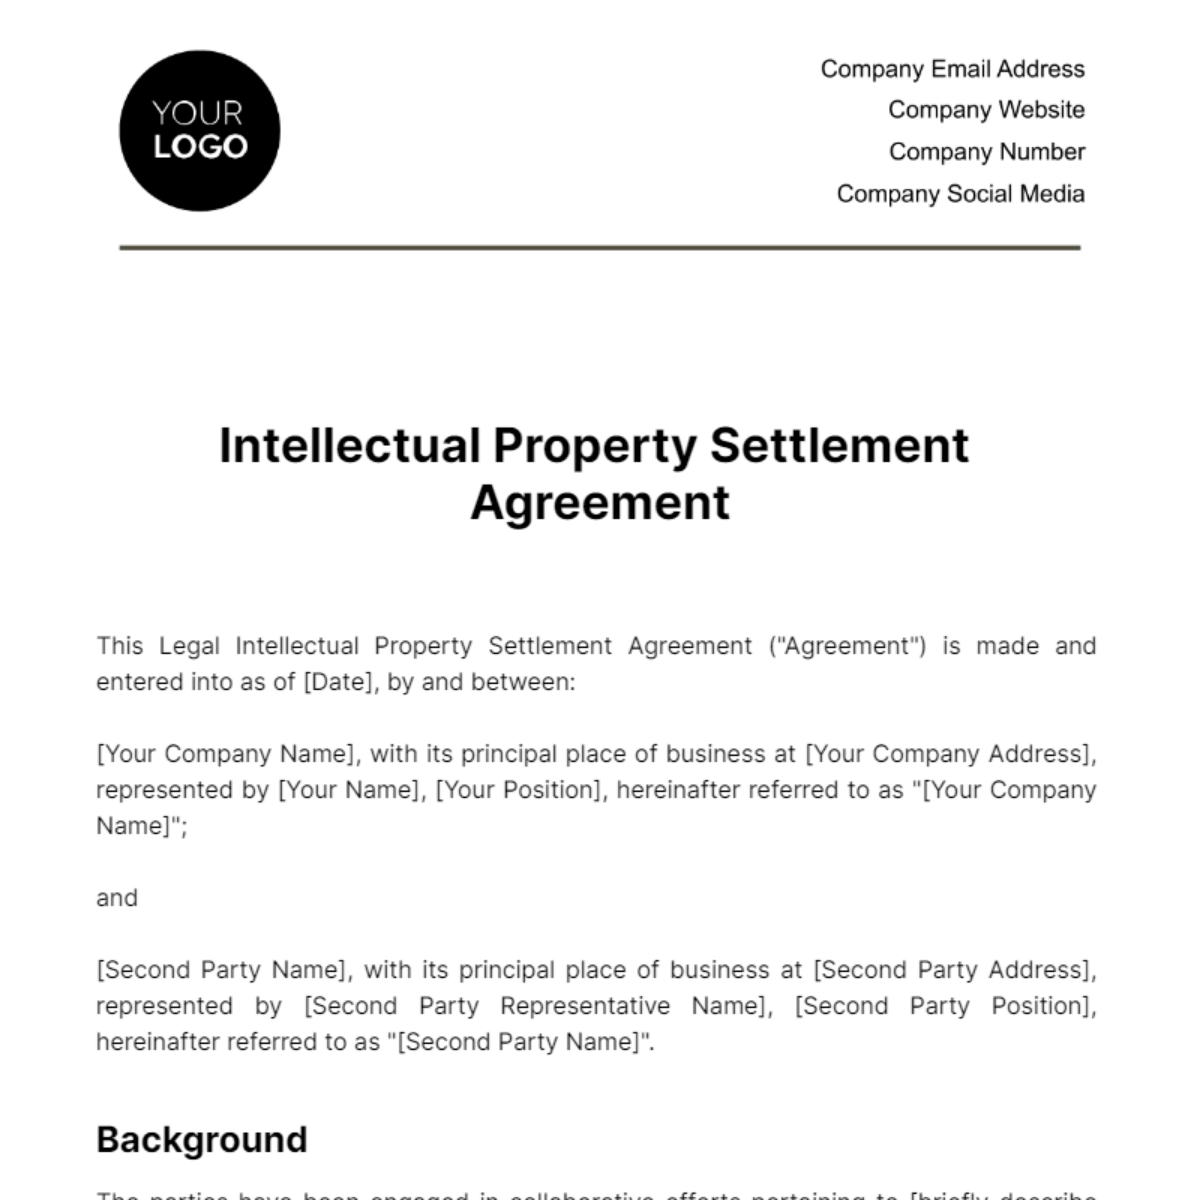 Free Legal Intellectual Property Settlement Agreement Template